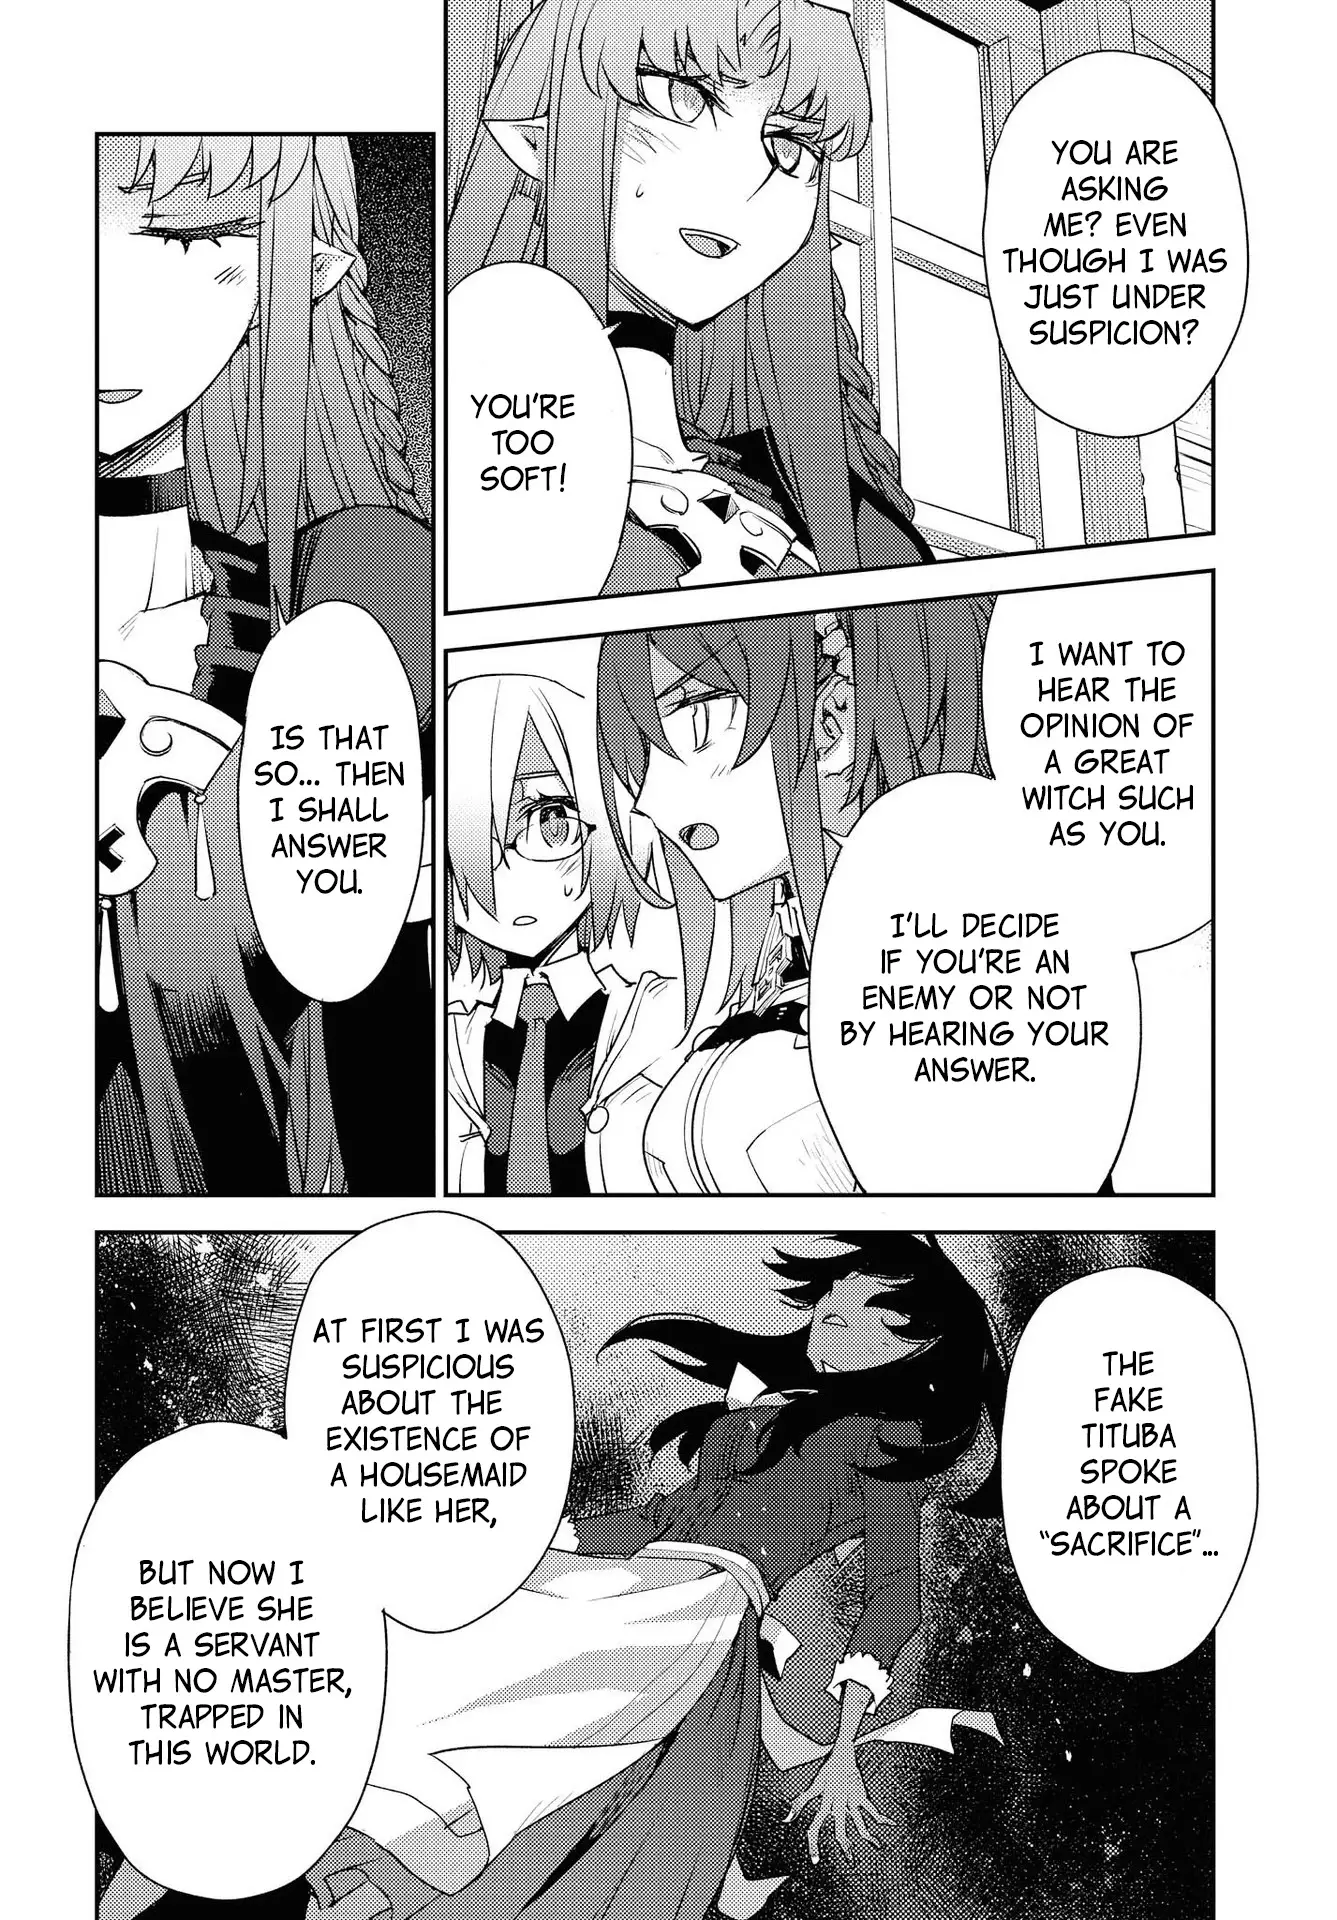 Fate/grand Order: Epic Of Remnant - Subspecies Singularity Iv: Taboo Advent Salem: Salem Of Heresy - 12 page 4